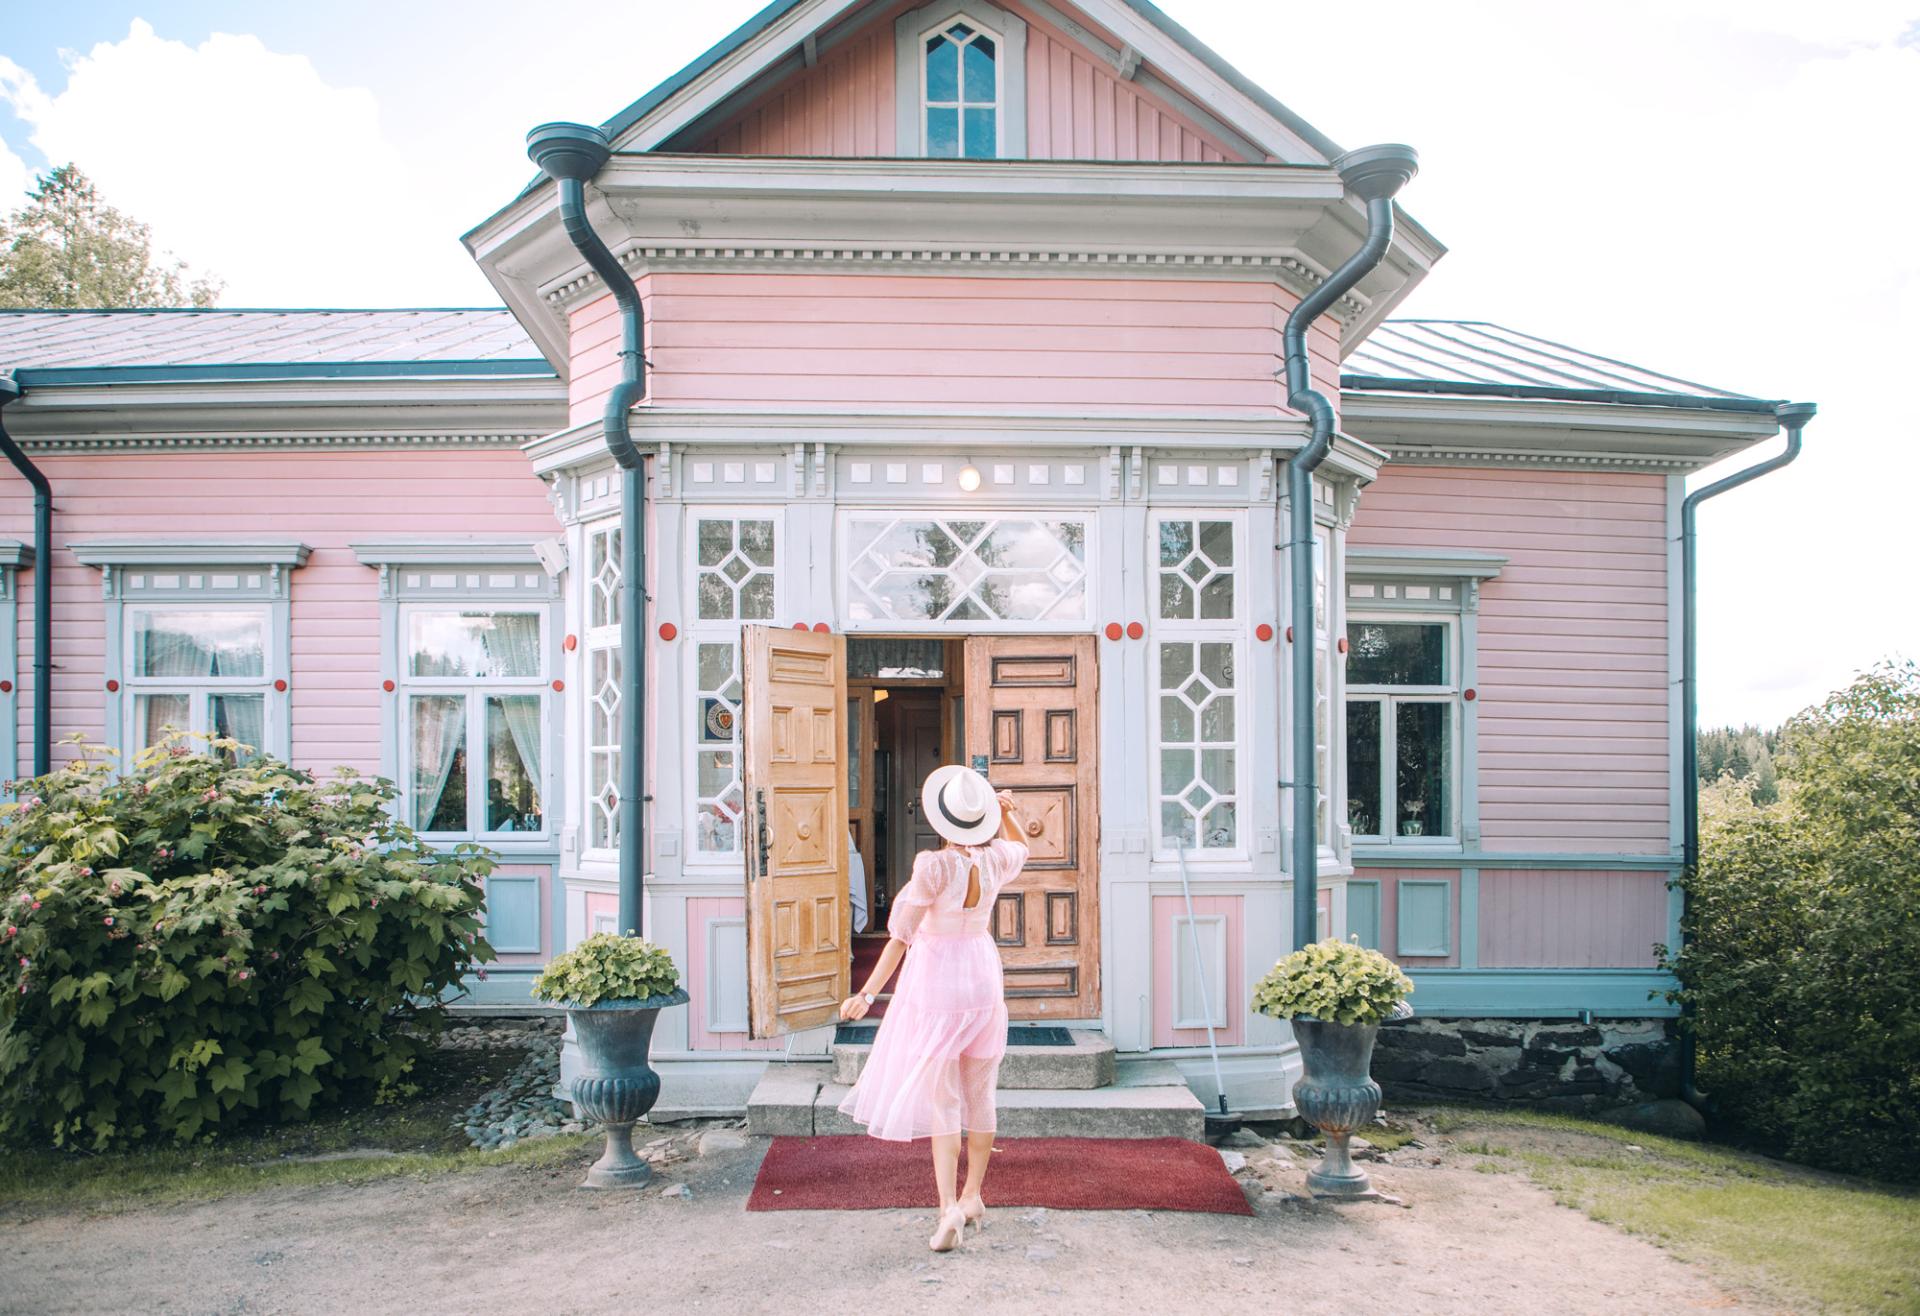 An old, wooden manor house and a woman in a pink dress standing in front of it.